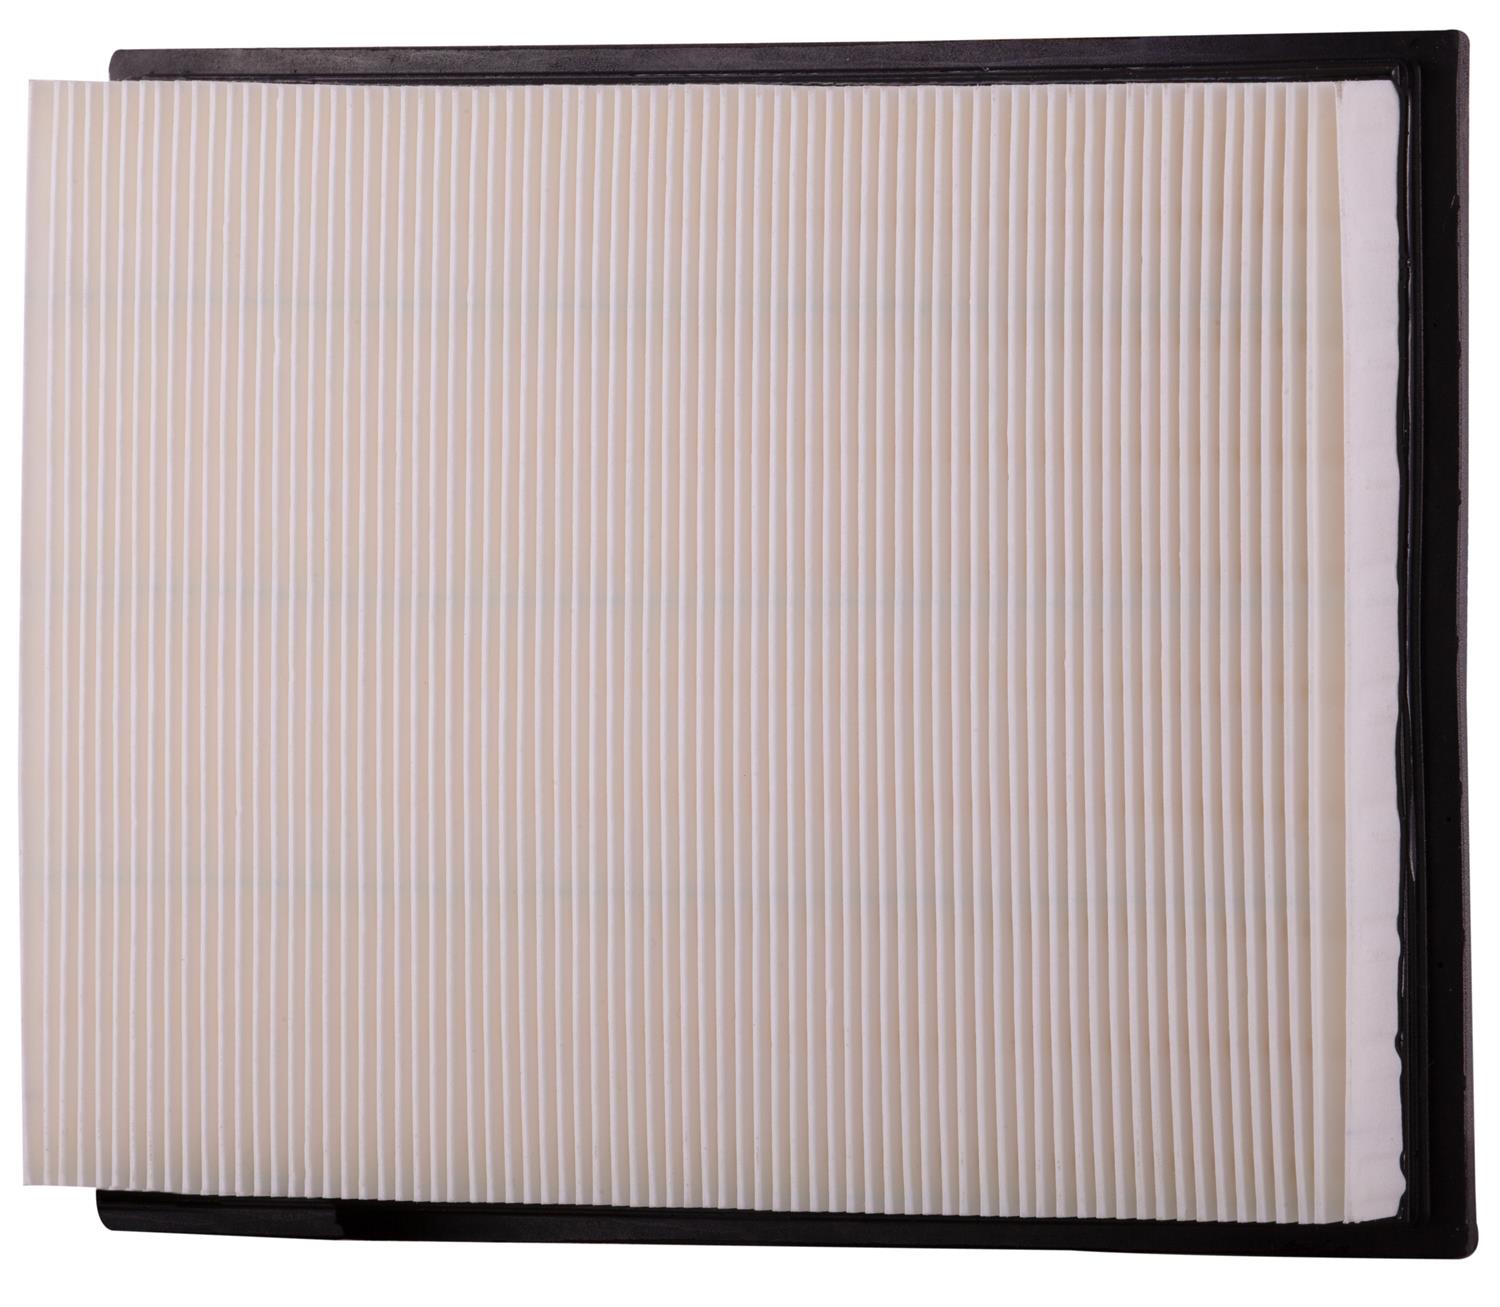 2001 Chevrolet Chevy Pickup Air Filter  PA80050